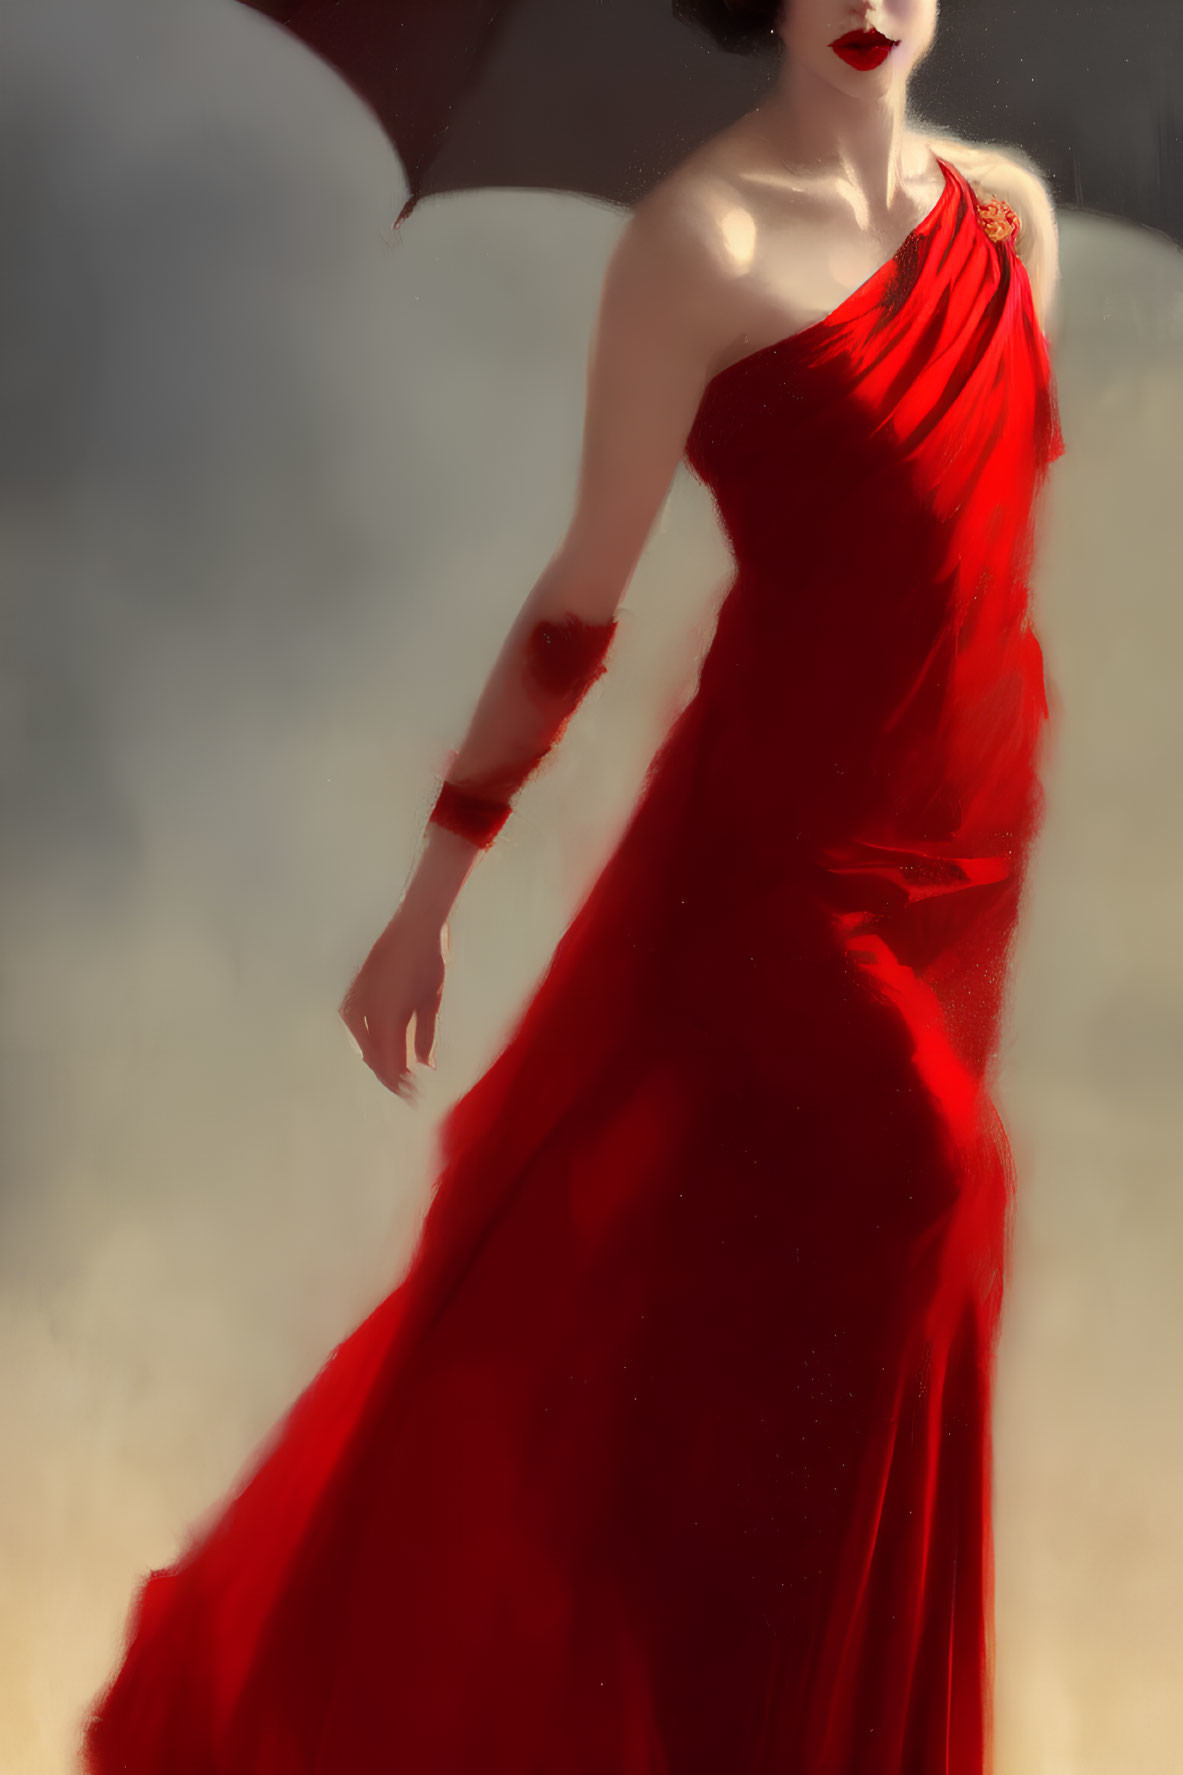 Woman in Red Dress with Black Umbrella in Misty Setting